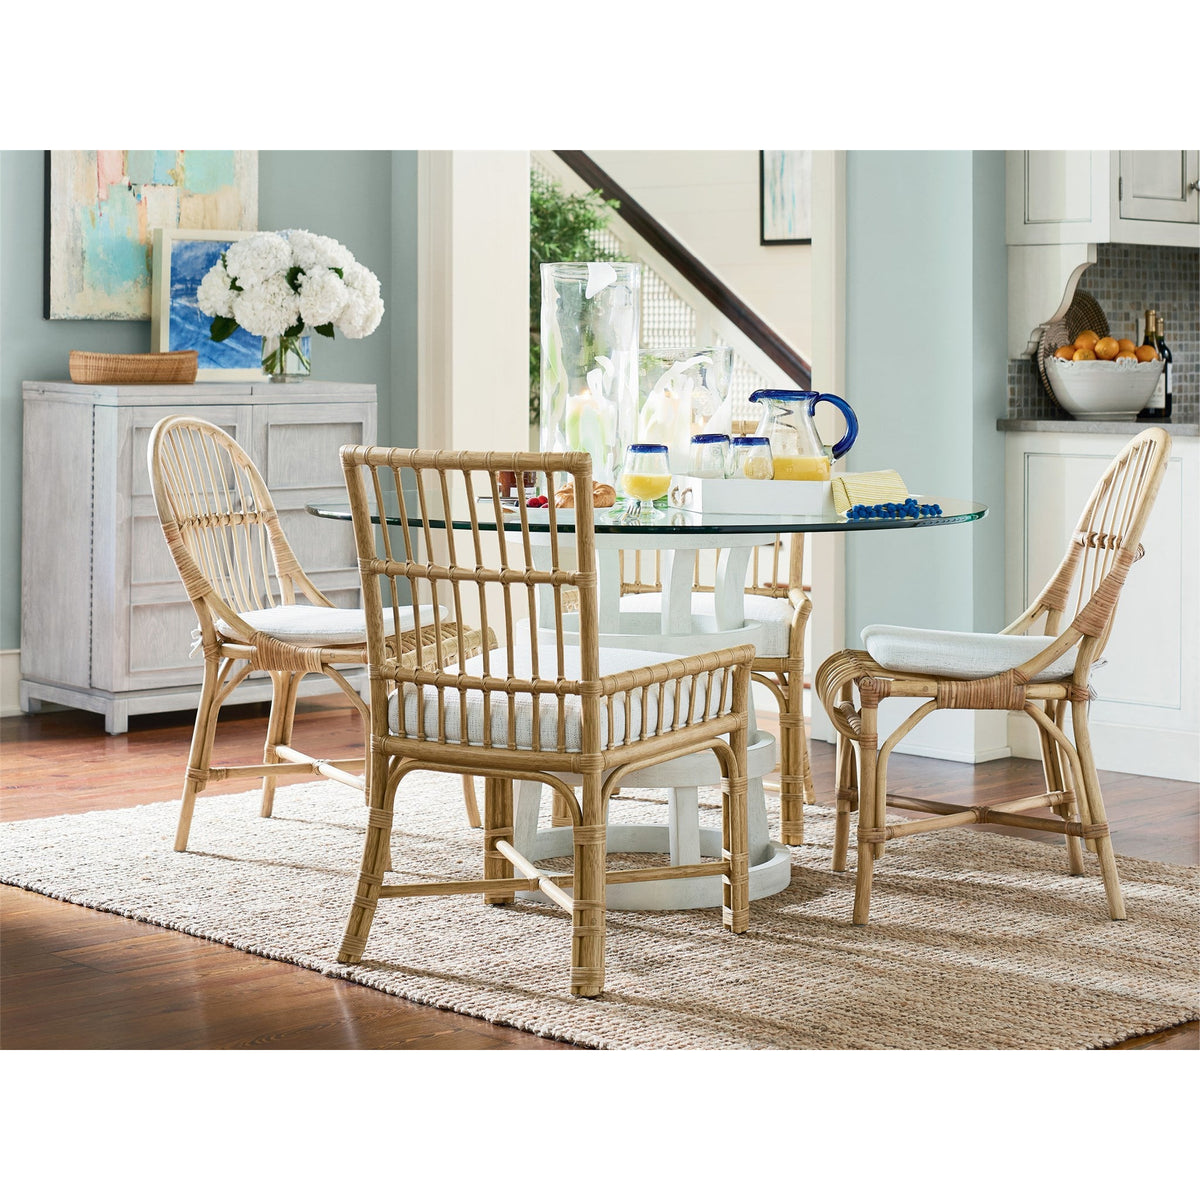 Clearwater Low Arm Chair - Be Bold Furniture